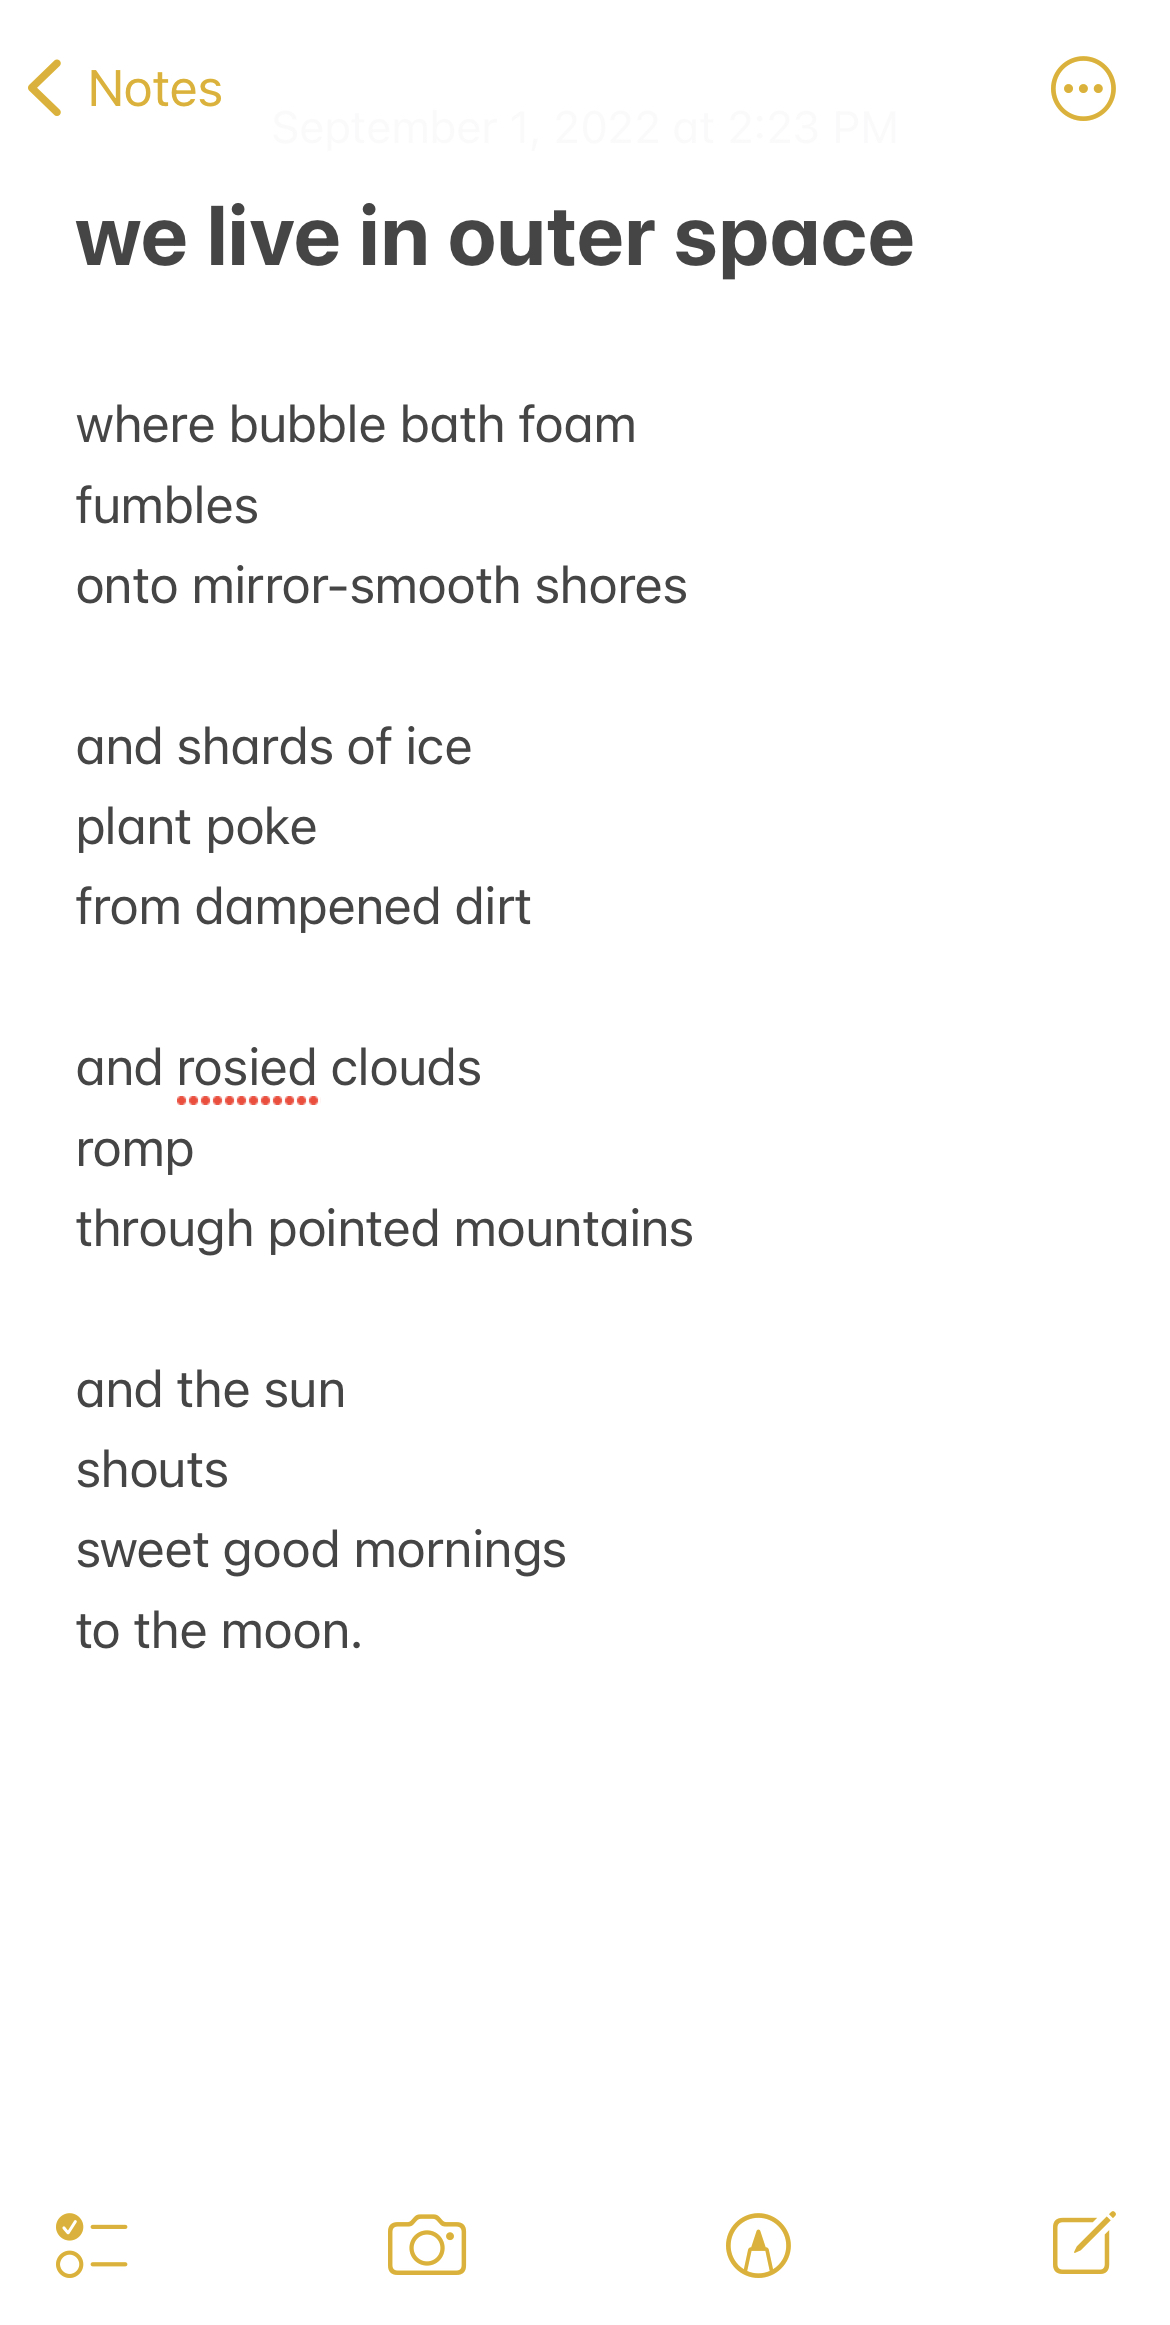 short poem written on Apple notes page entitled 'we live in outer space'